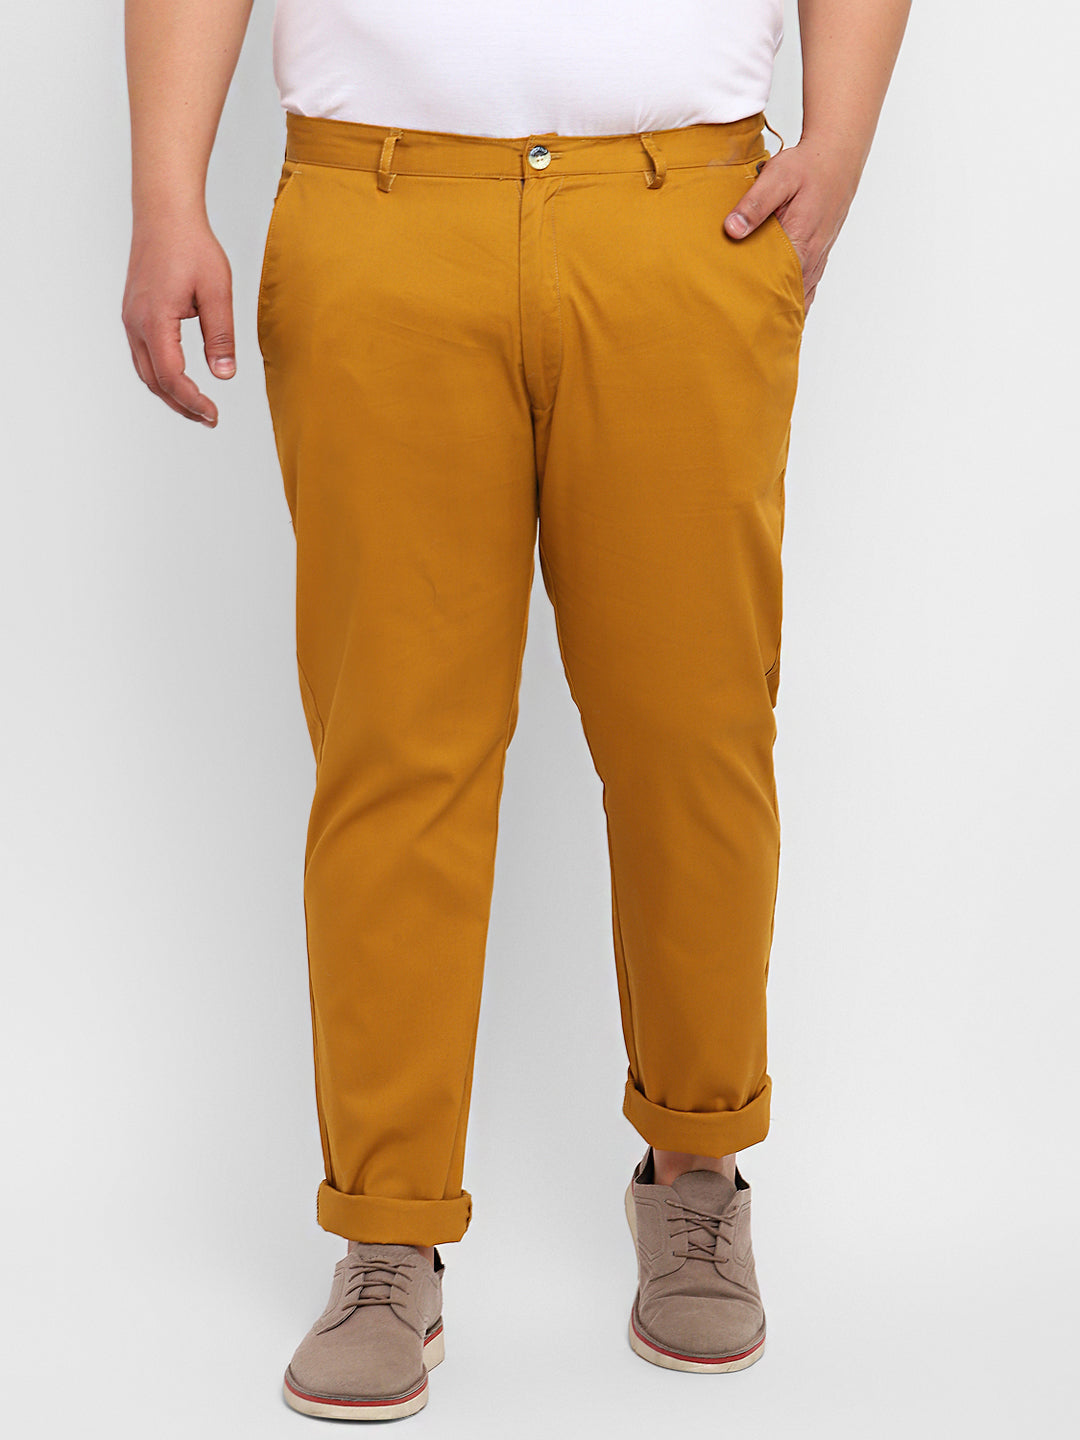 Plus Men's Yellow Cotton Light Weight Non-Stretch Regular Fit Casual Trousers